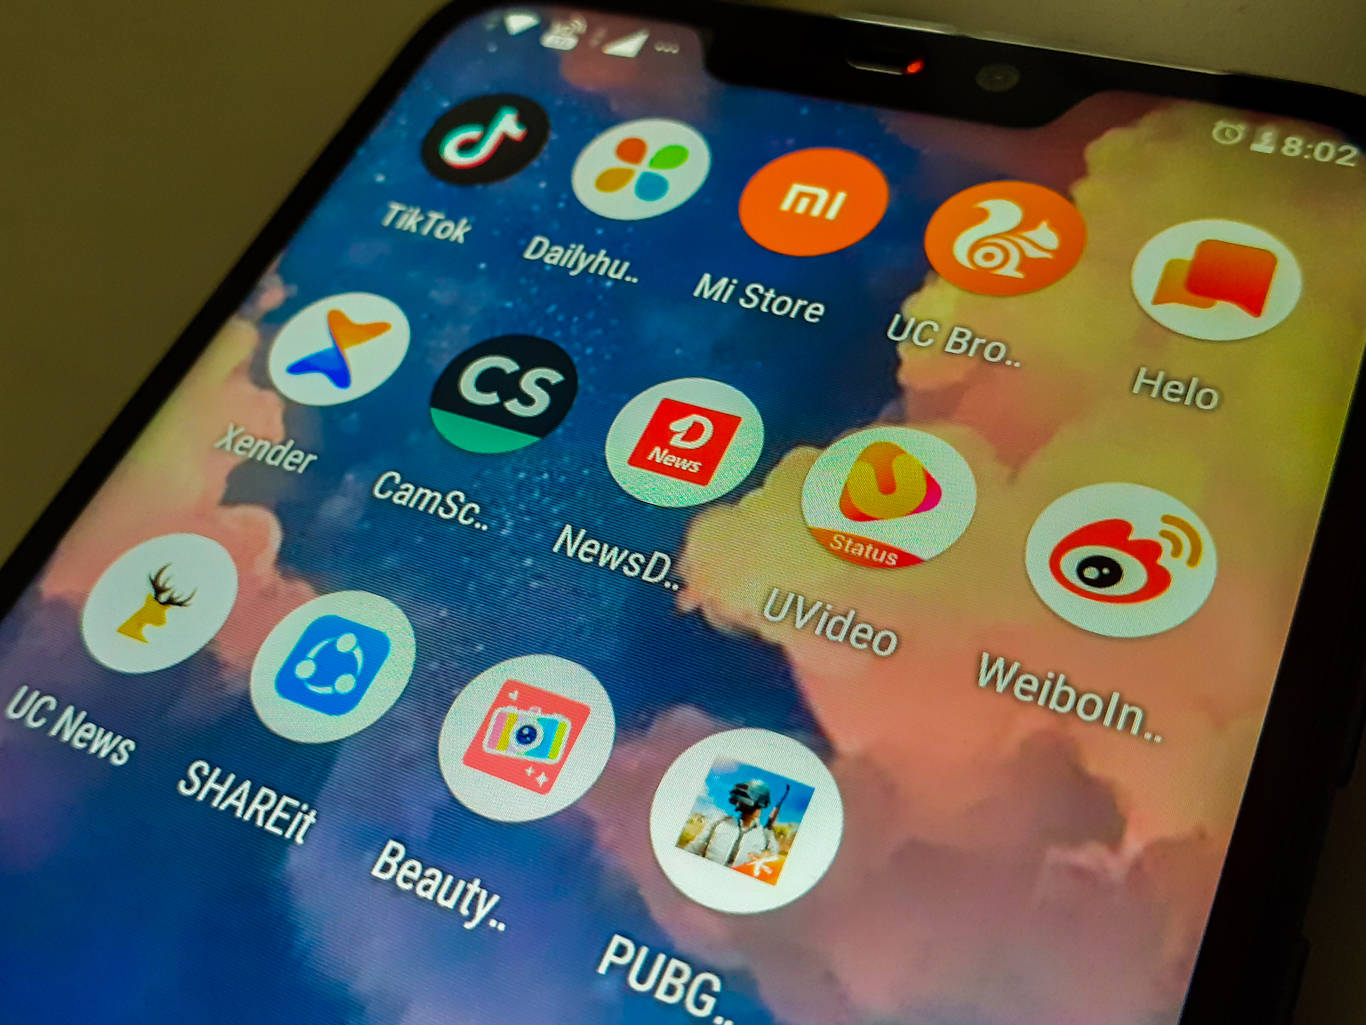 184 Chinese apps banned